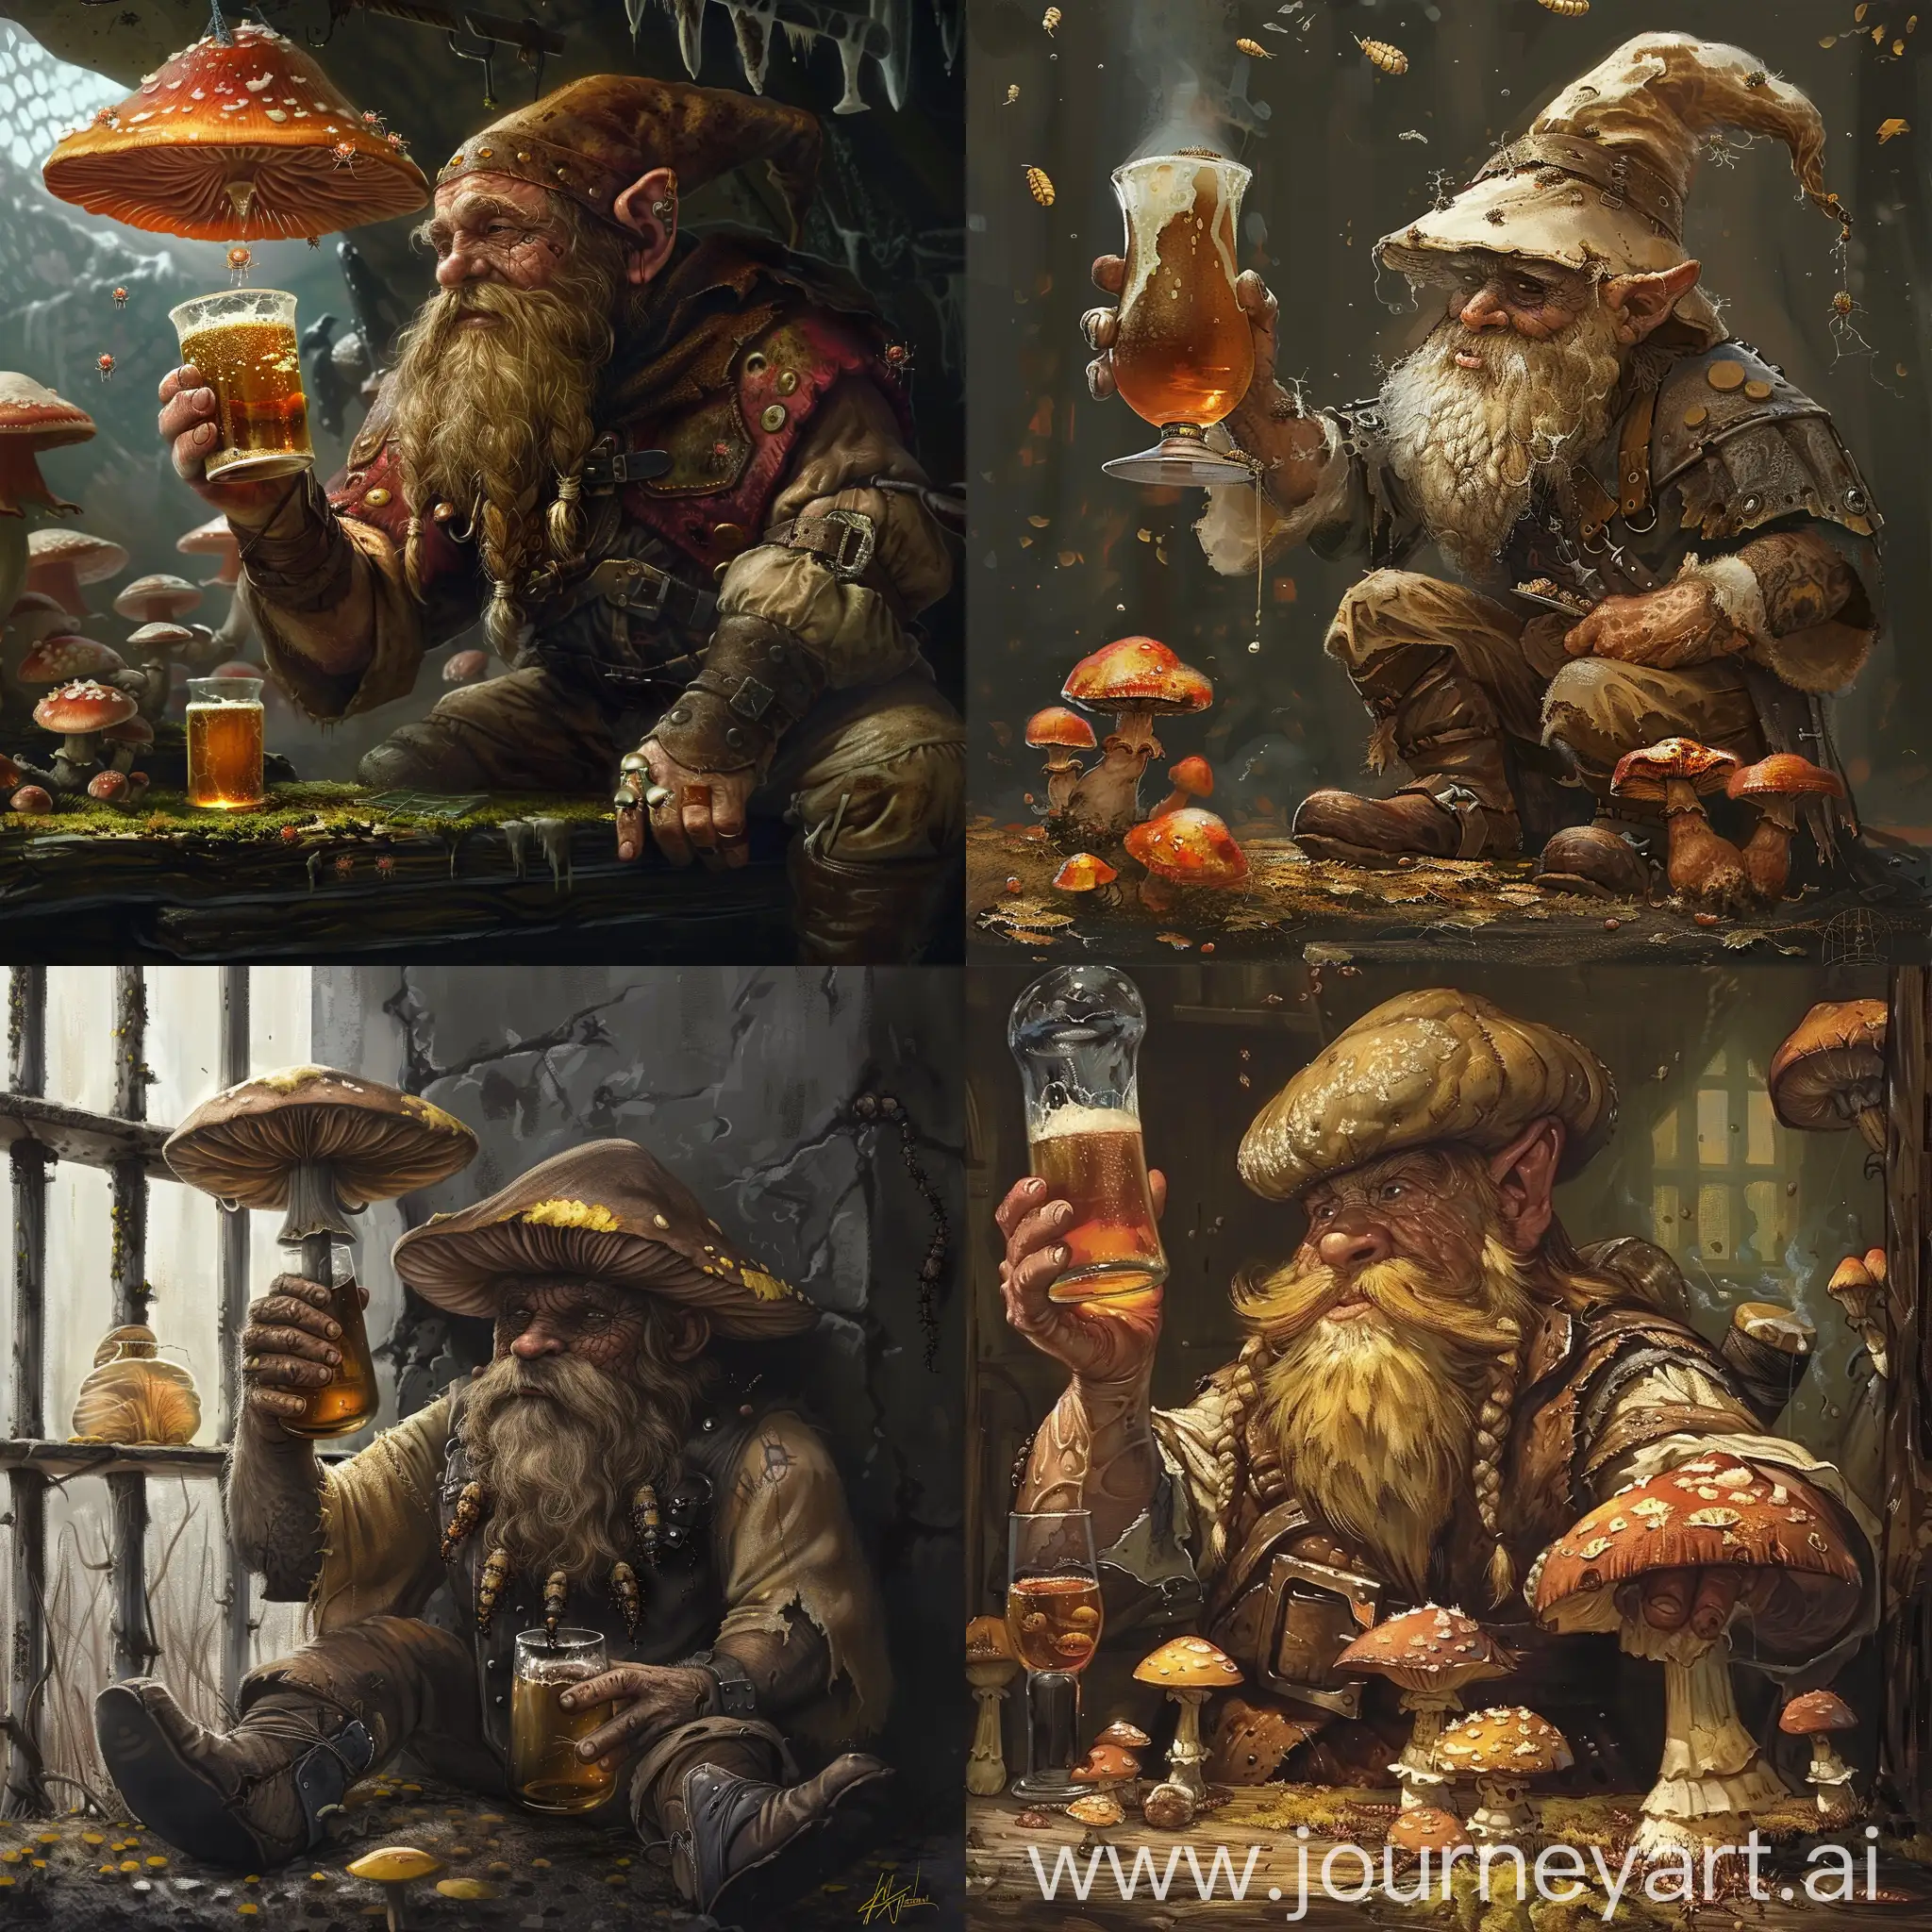 Dwarf-Brewing-Ale-in-Prison-Mushroom-and-Larvae-Concoction